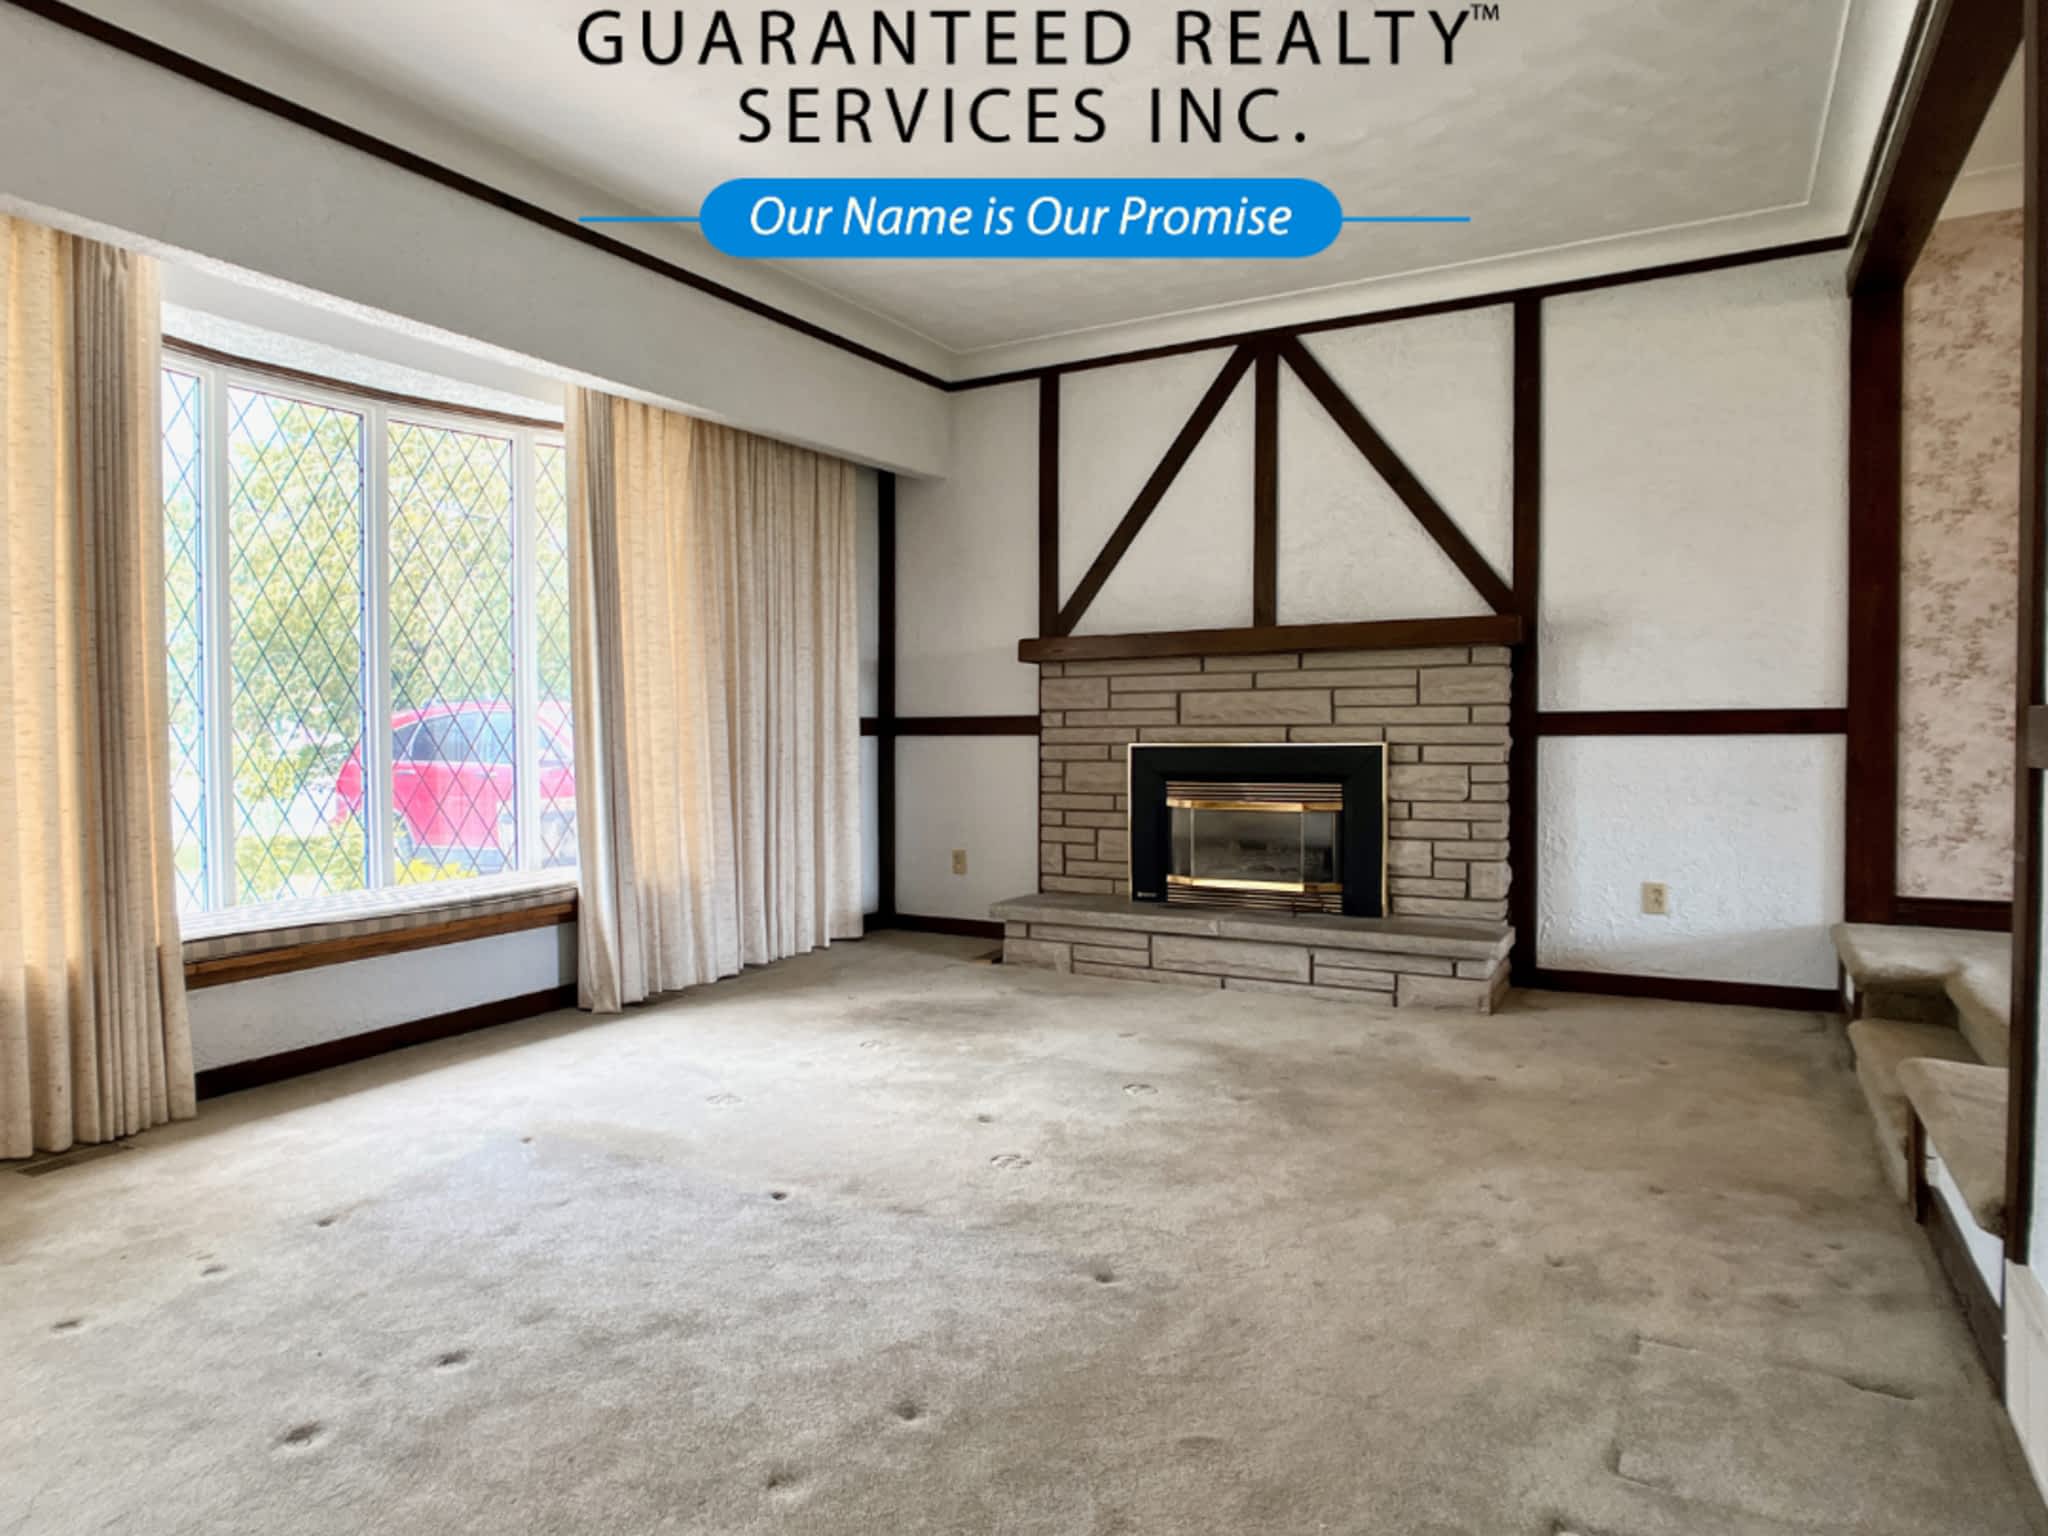 photo Your Homes Sold Guaranteed Realty Services Inc.